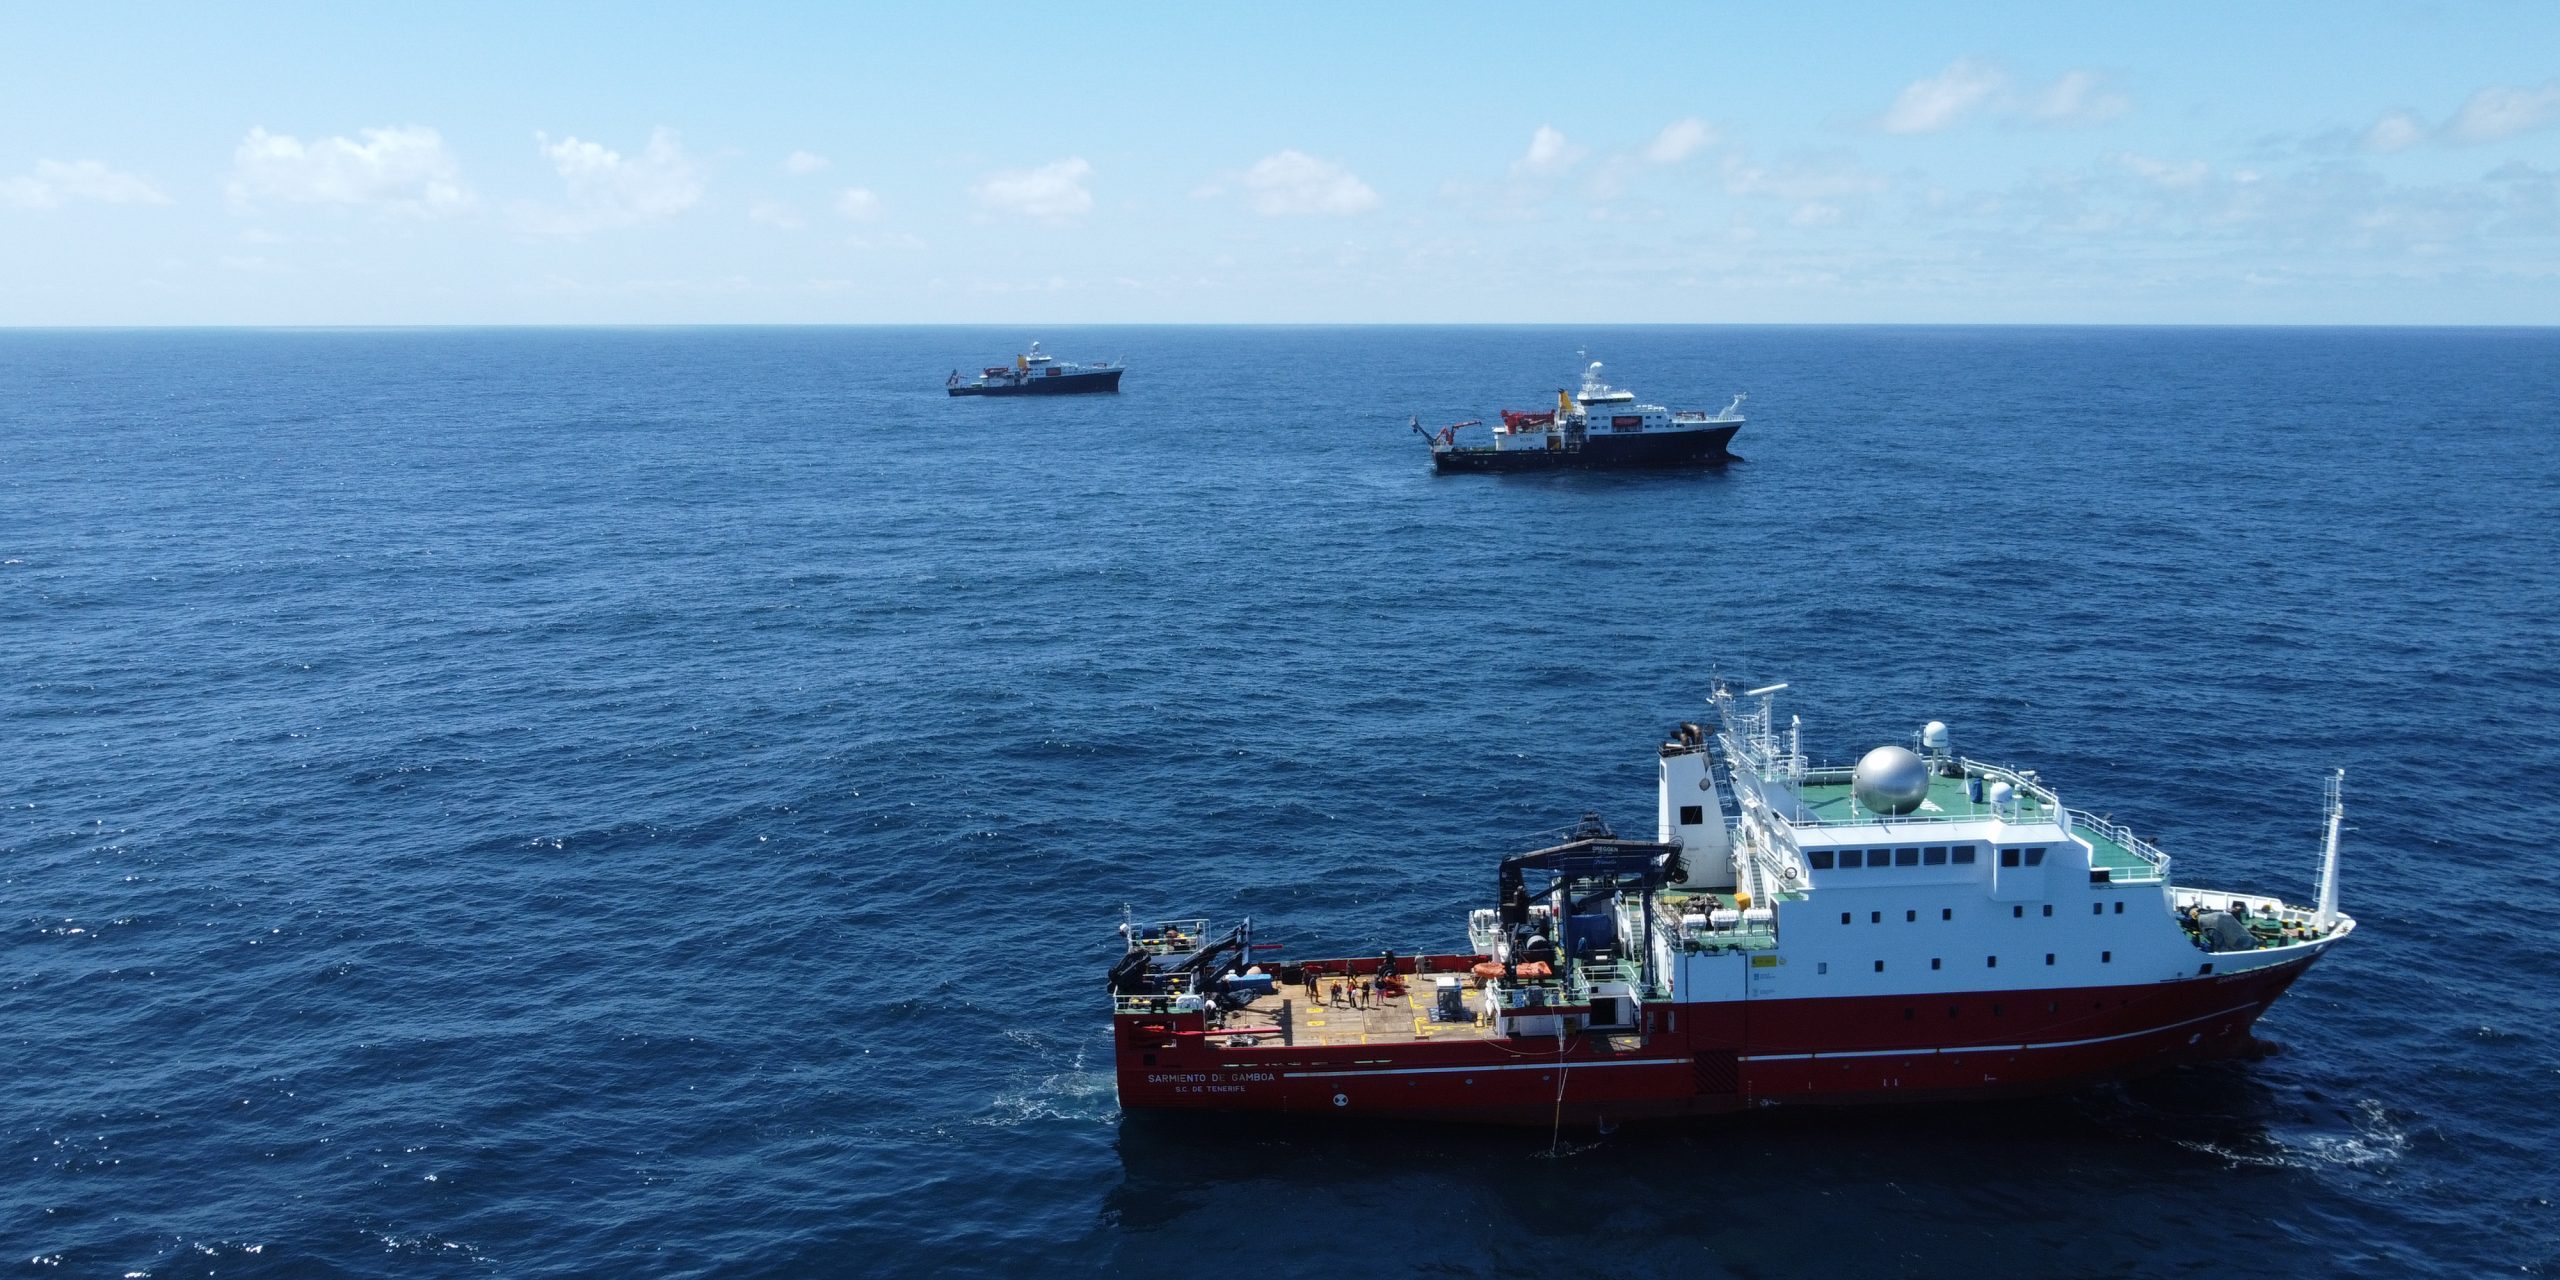 During the EXPORTS expedition, the R/V Sarmiento de Gamboa, the RSS James Cook, and the RSS Discovery are constantly coordinating their science operations — sometimes they get close enough for a group photo.